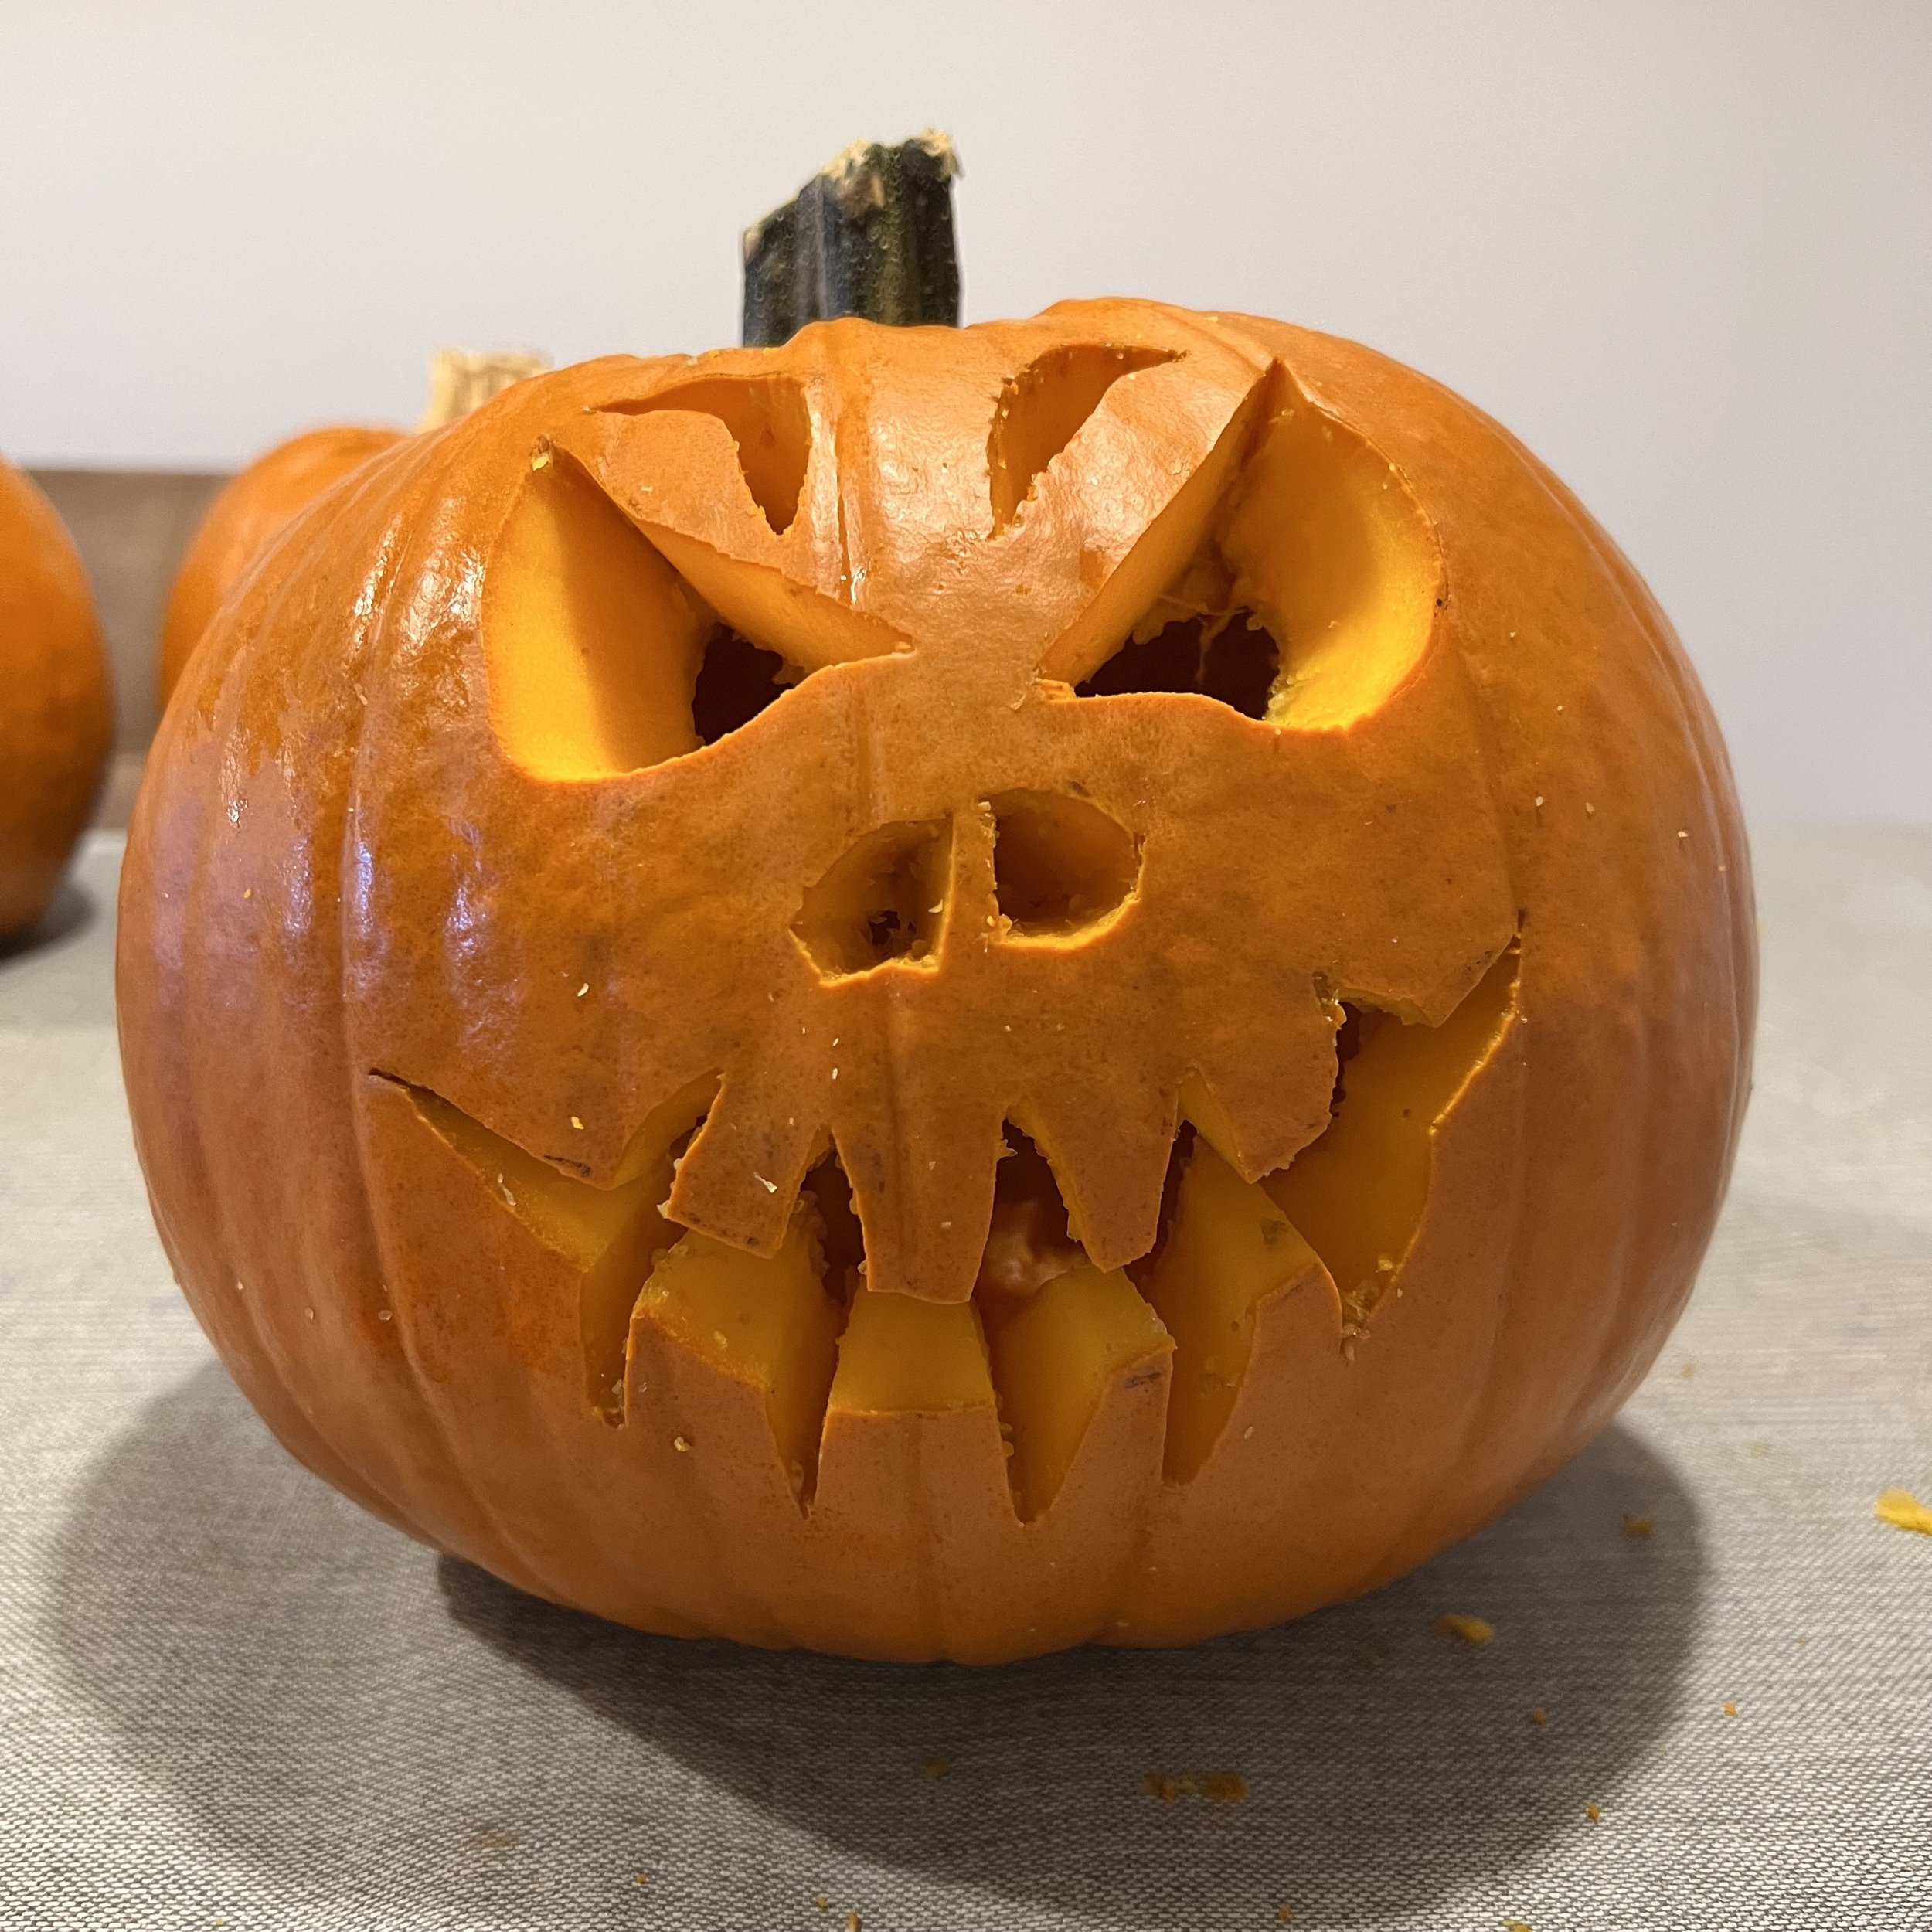 Pumpkin-Carving-Scary-Face-Finished-Sarah-Ransome-Art.jpg